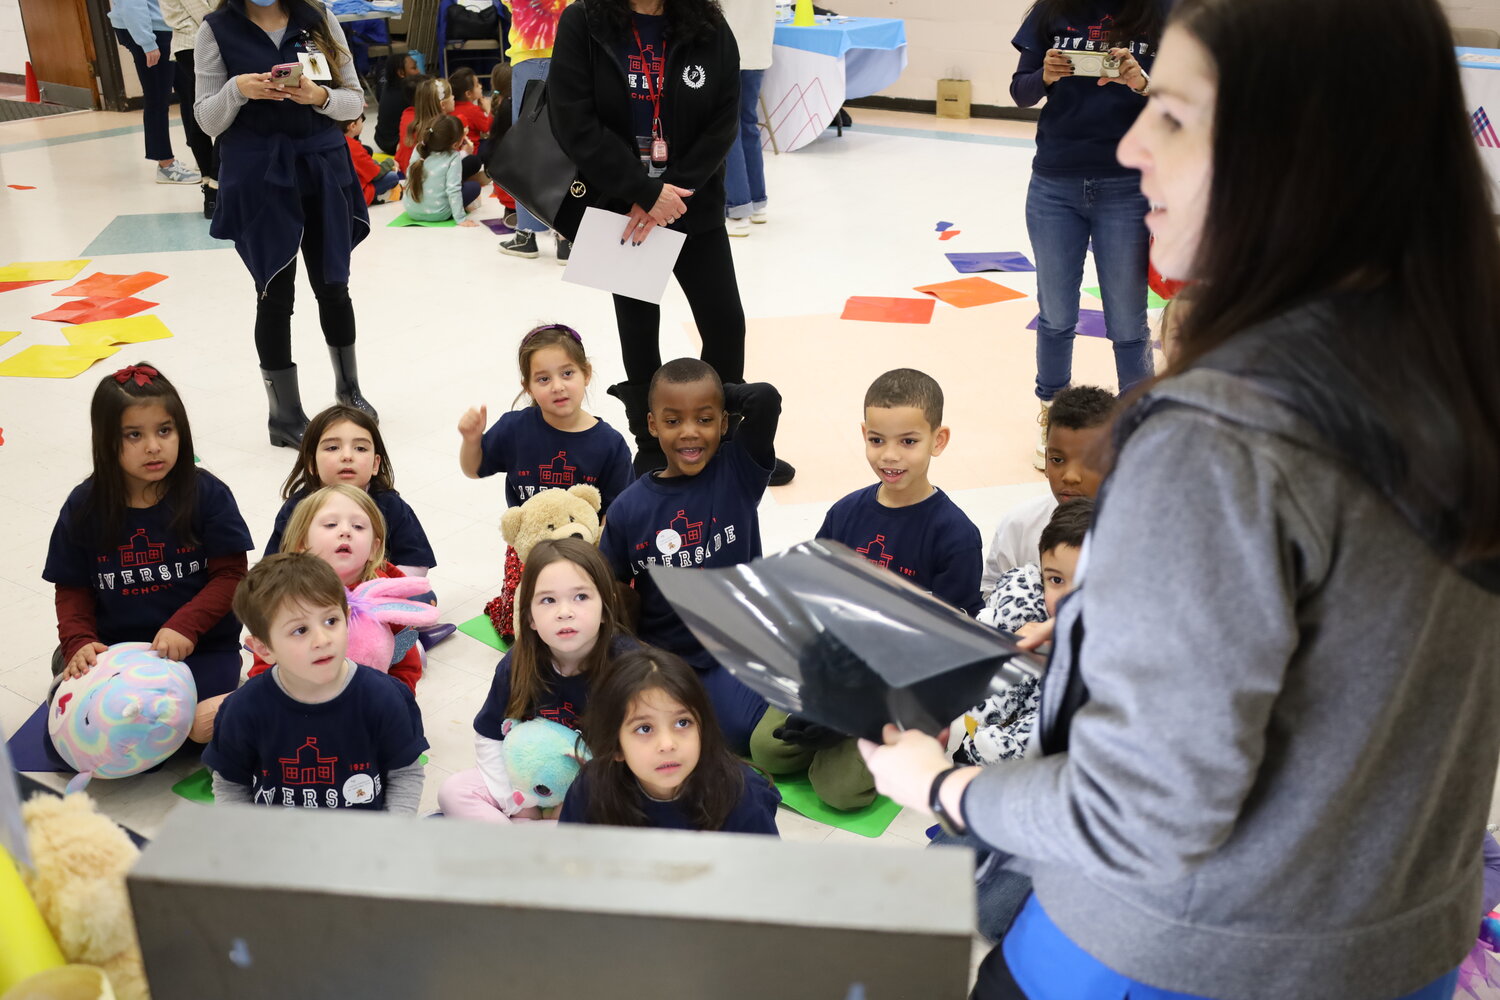 Riverside students were excited to learn about x-rays and medical imaging during the Teddy Bear Clinic on Jan. 19.